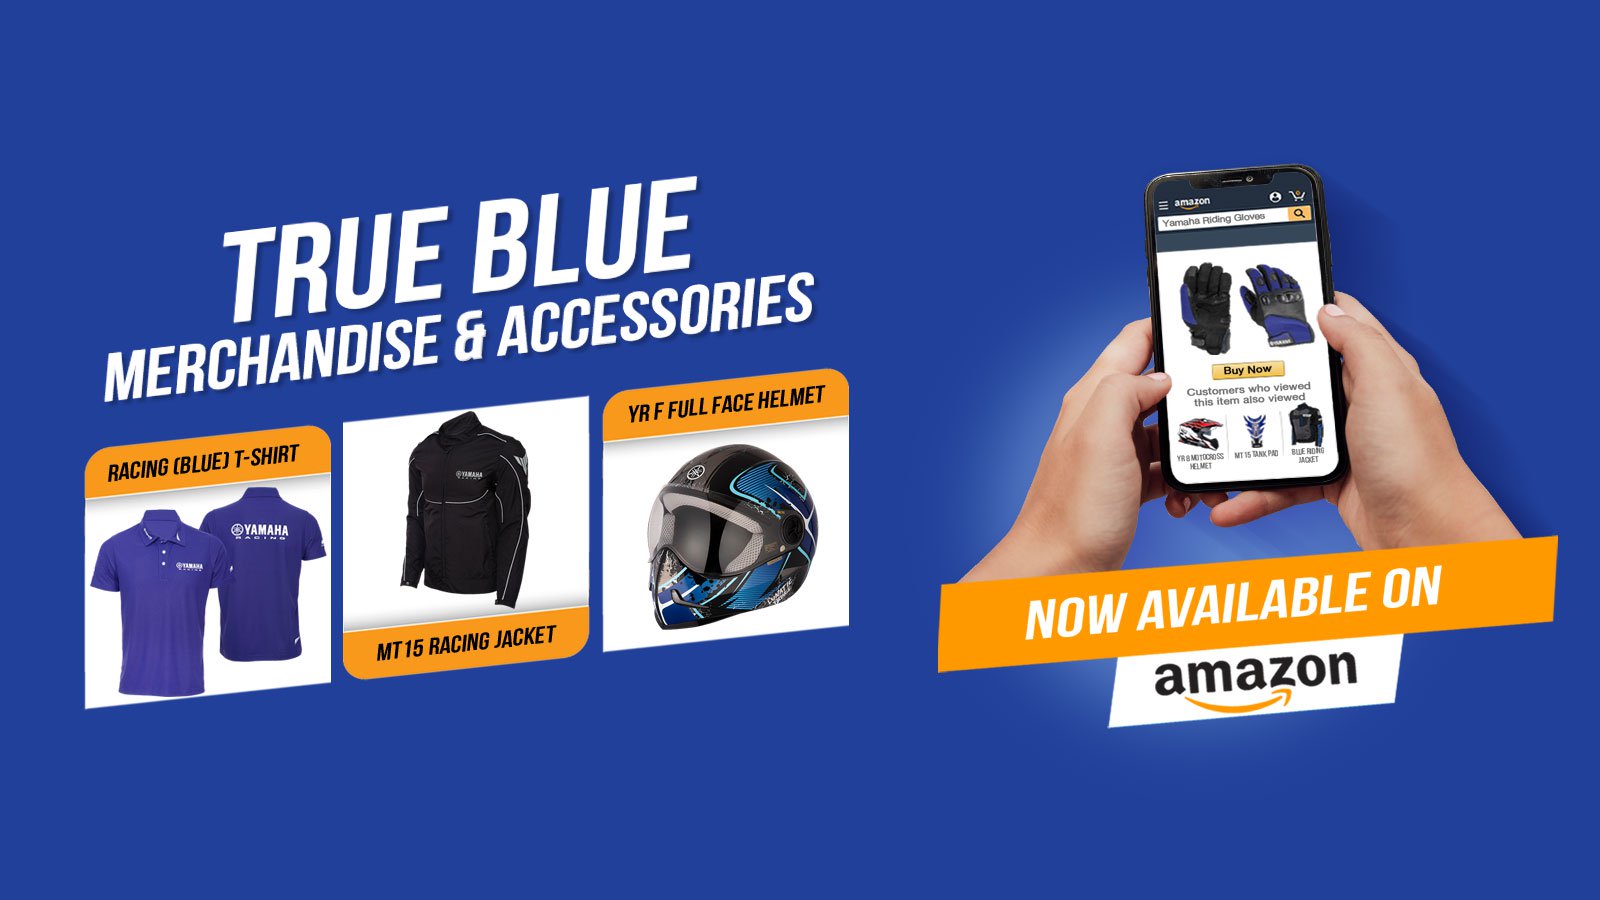 Yamaha Apparels and Accessories are now available on Amazon.in